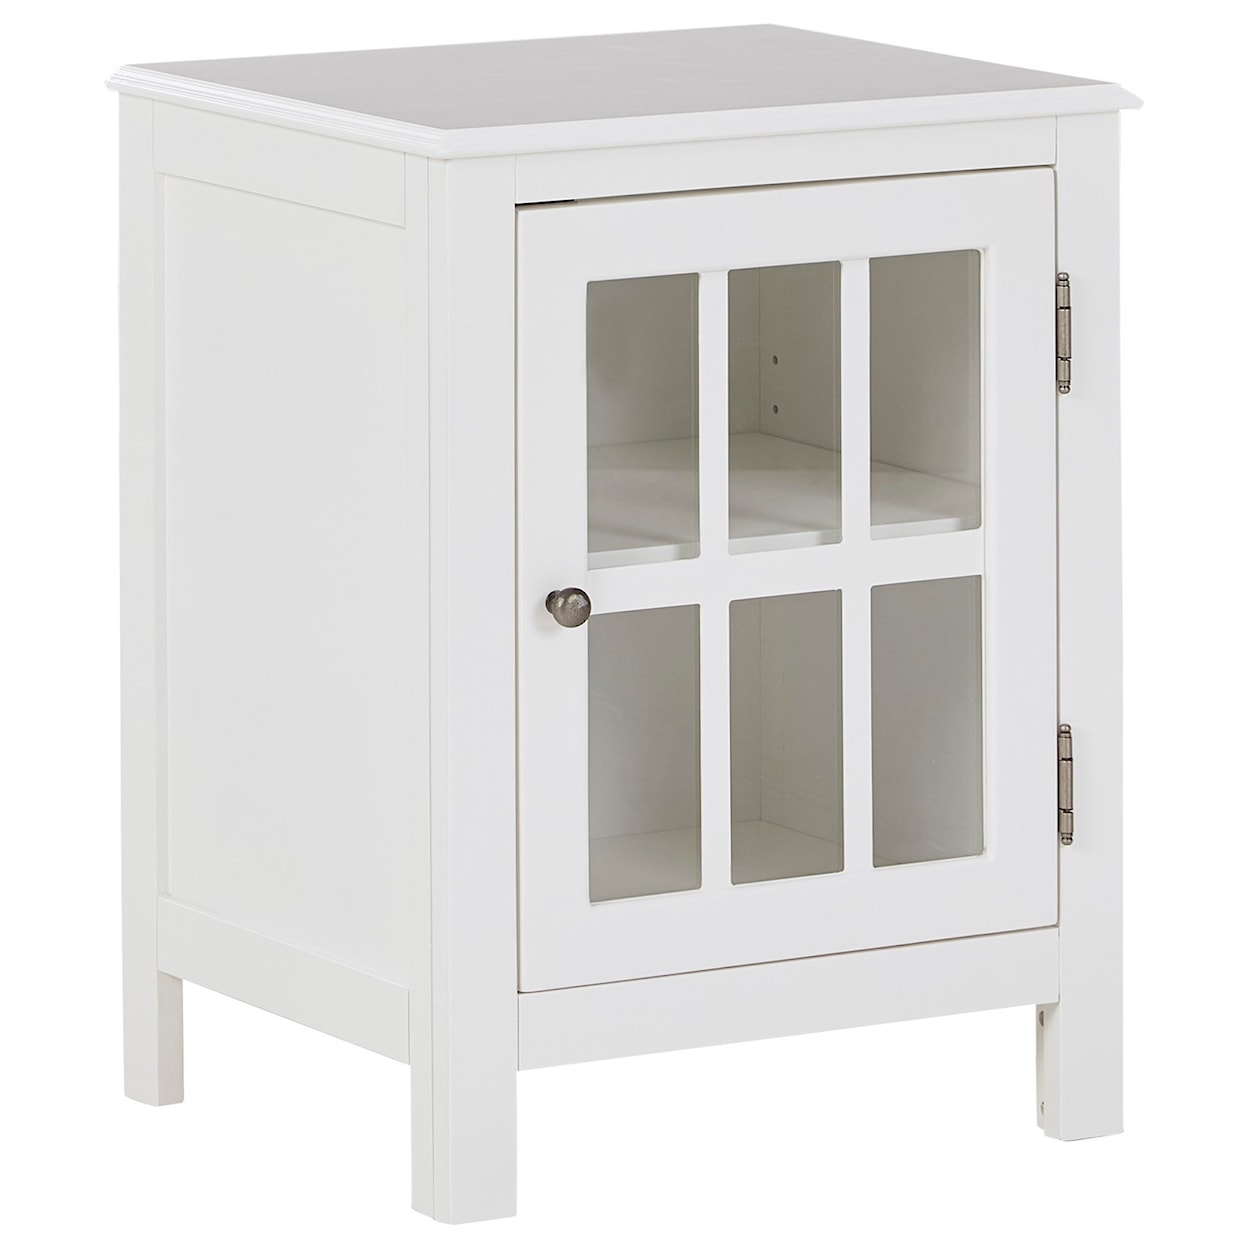 Benchcraft Opelton Accent Cabinet